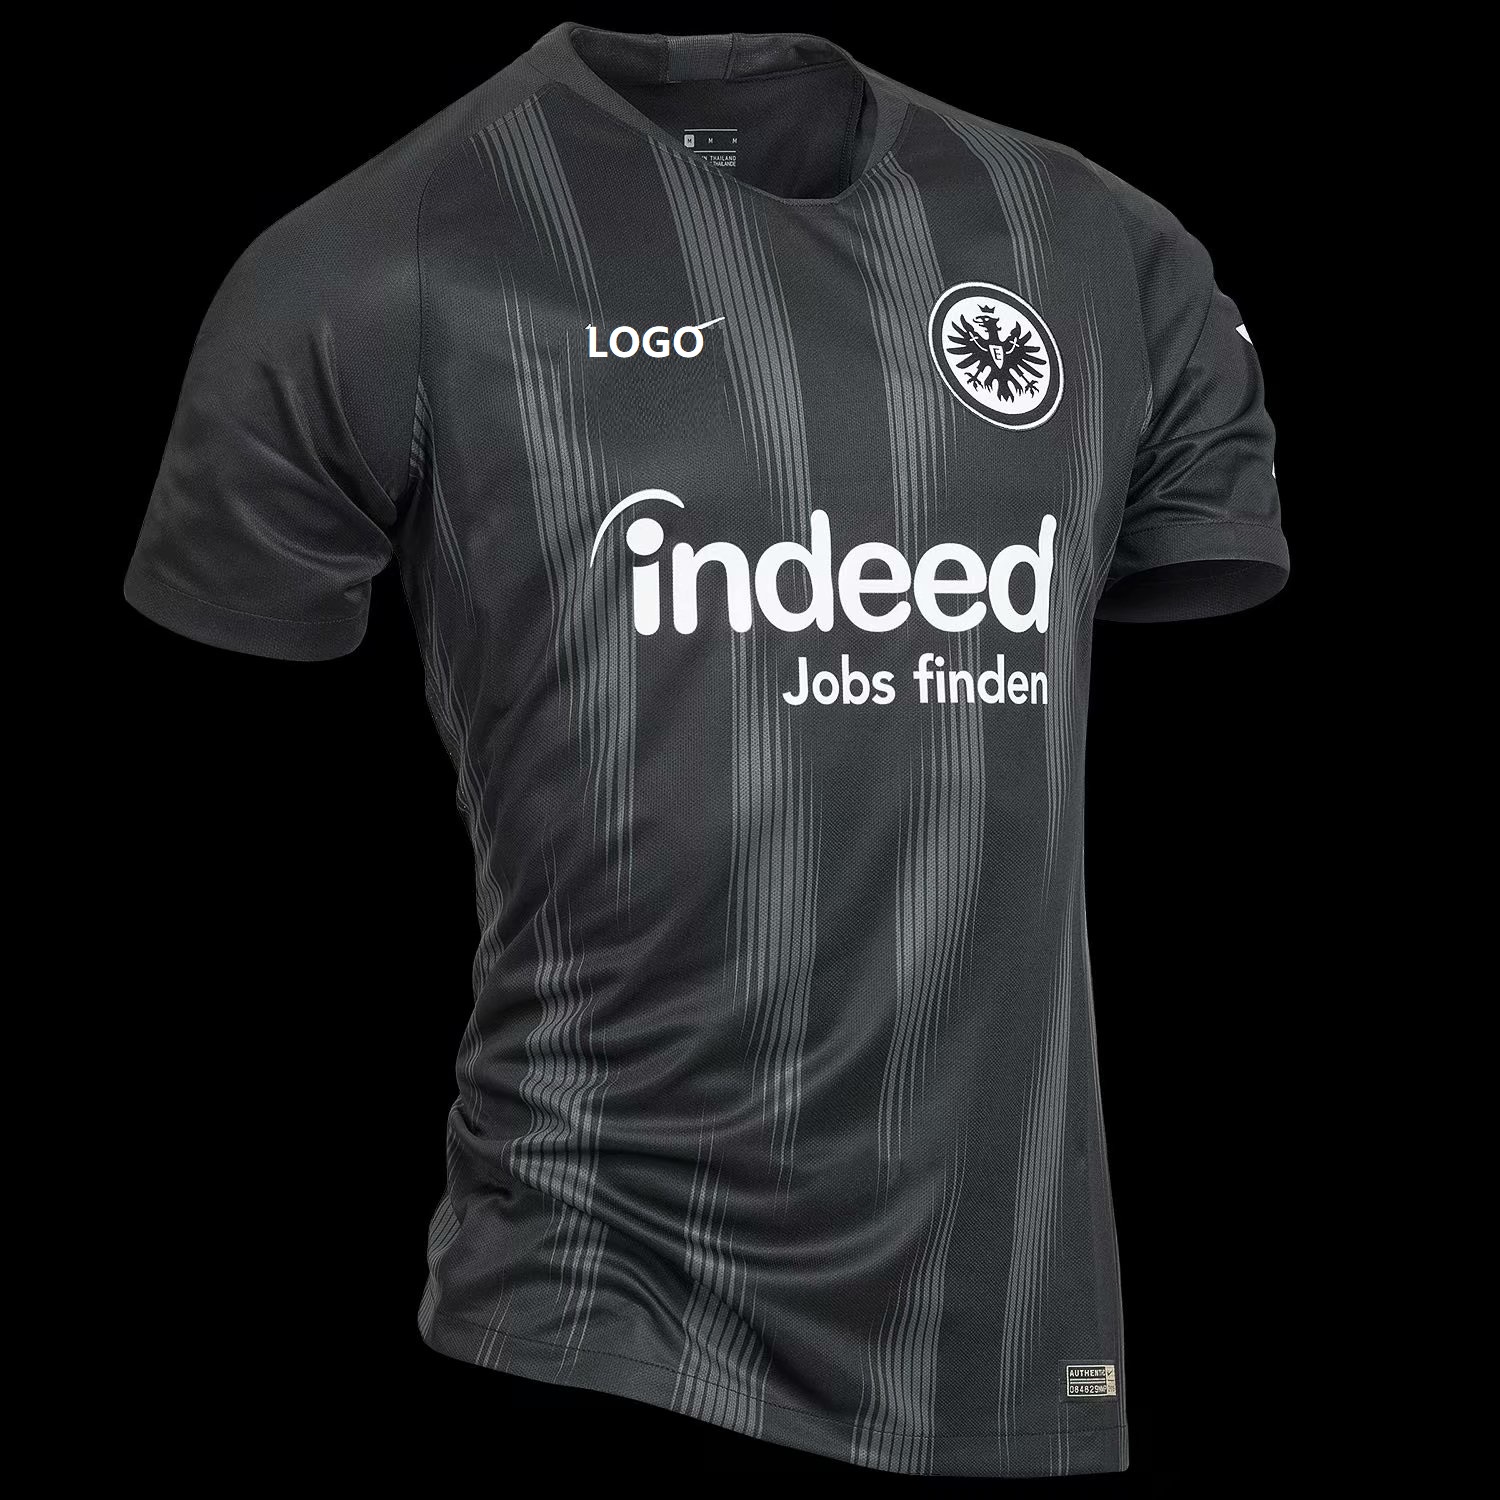 black and grey soccer jersey